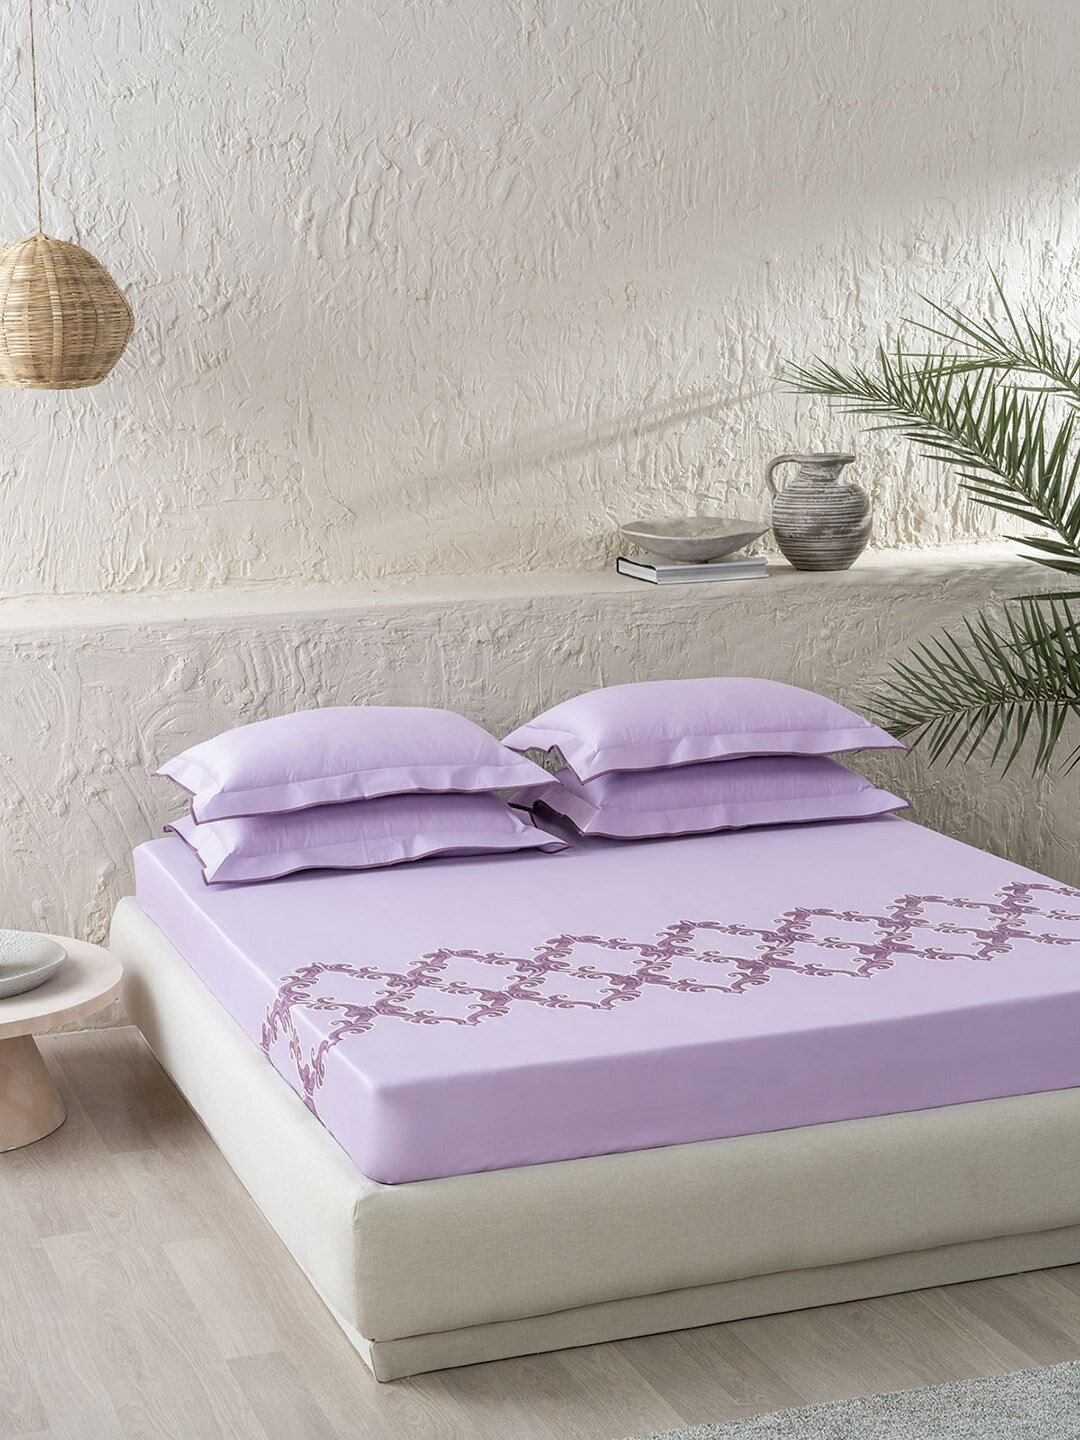 DDecor Purple Embroidered Cotton 210 TC Double King Bedding Set Price in India